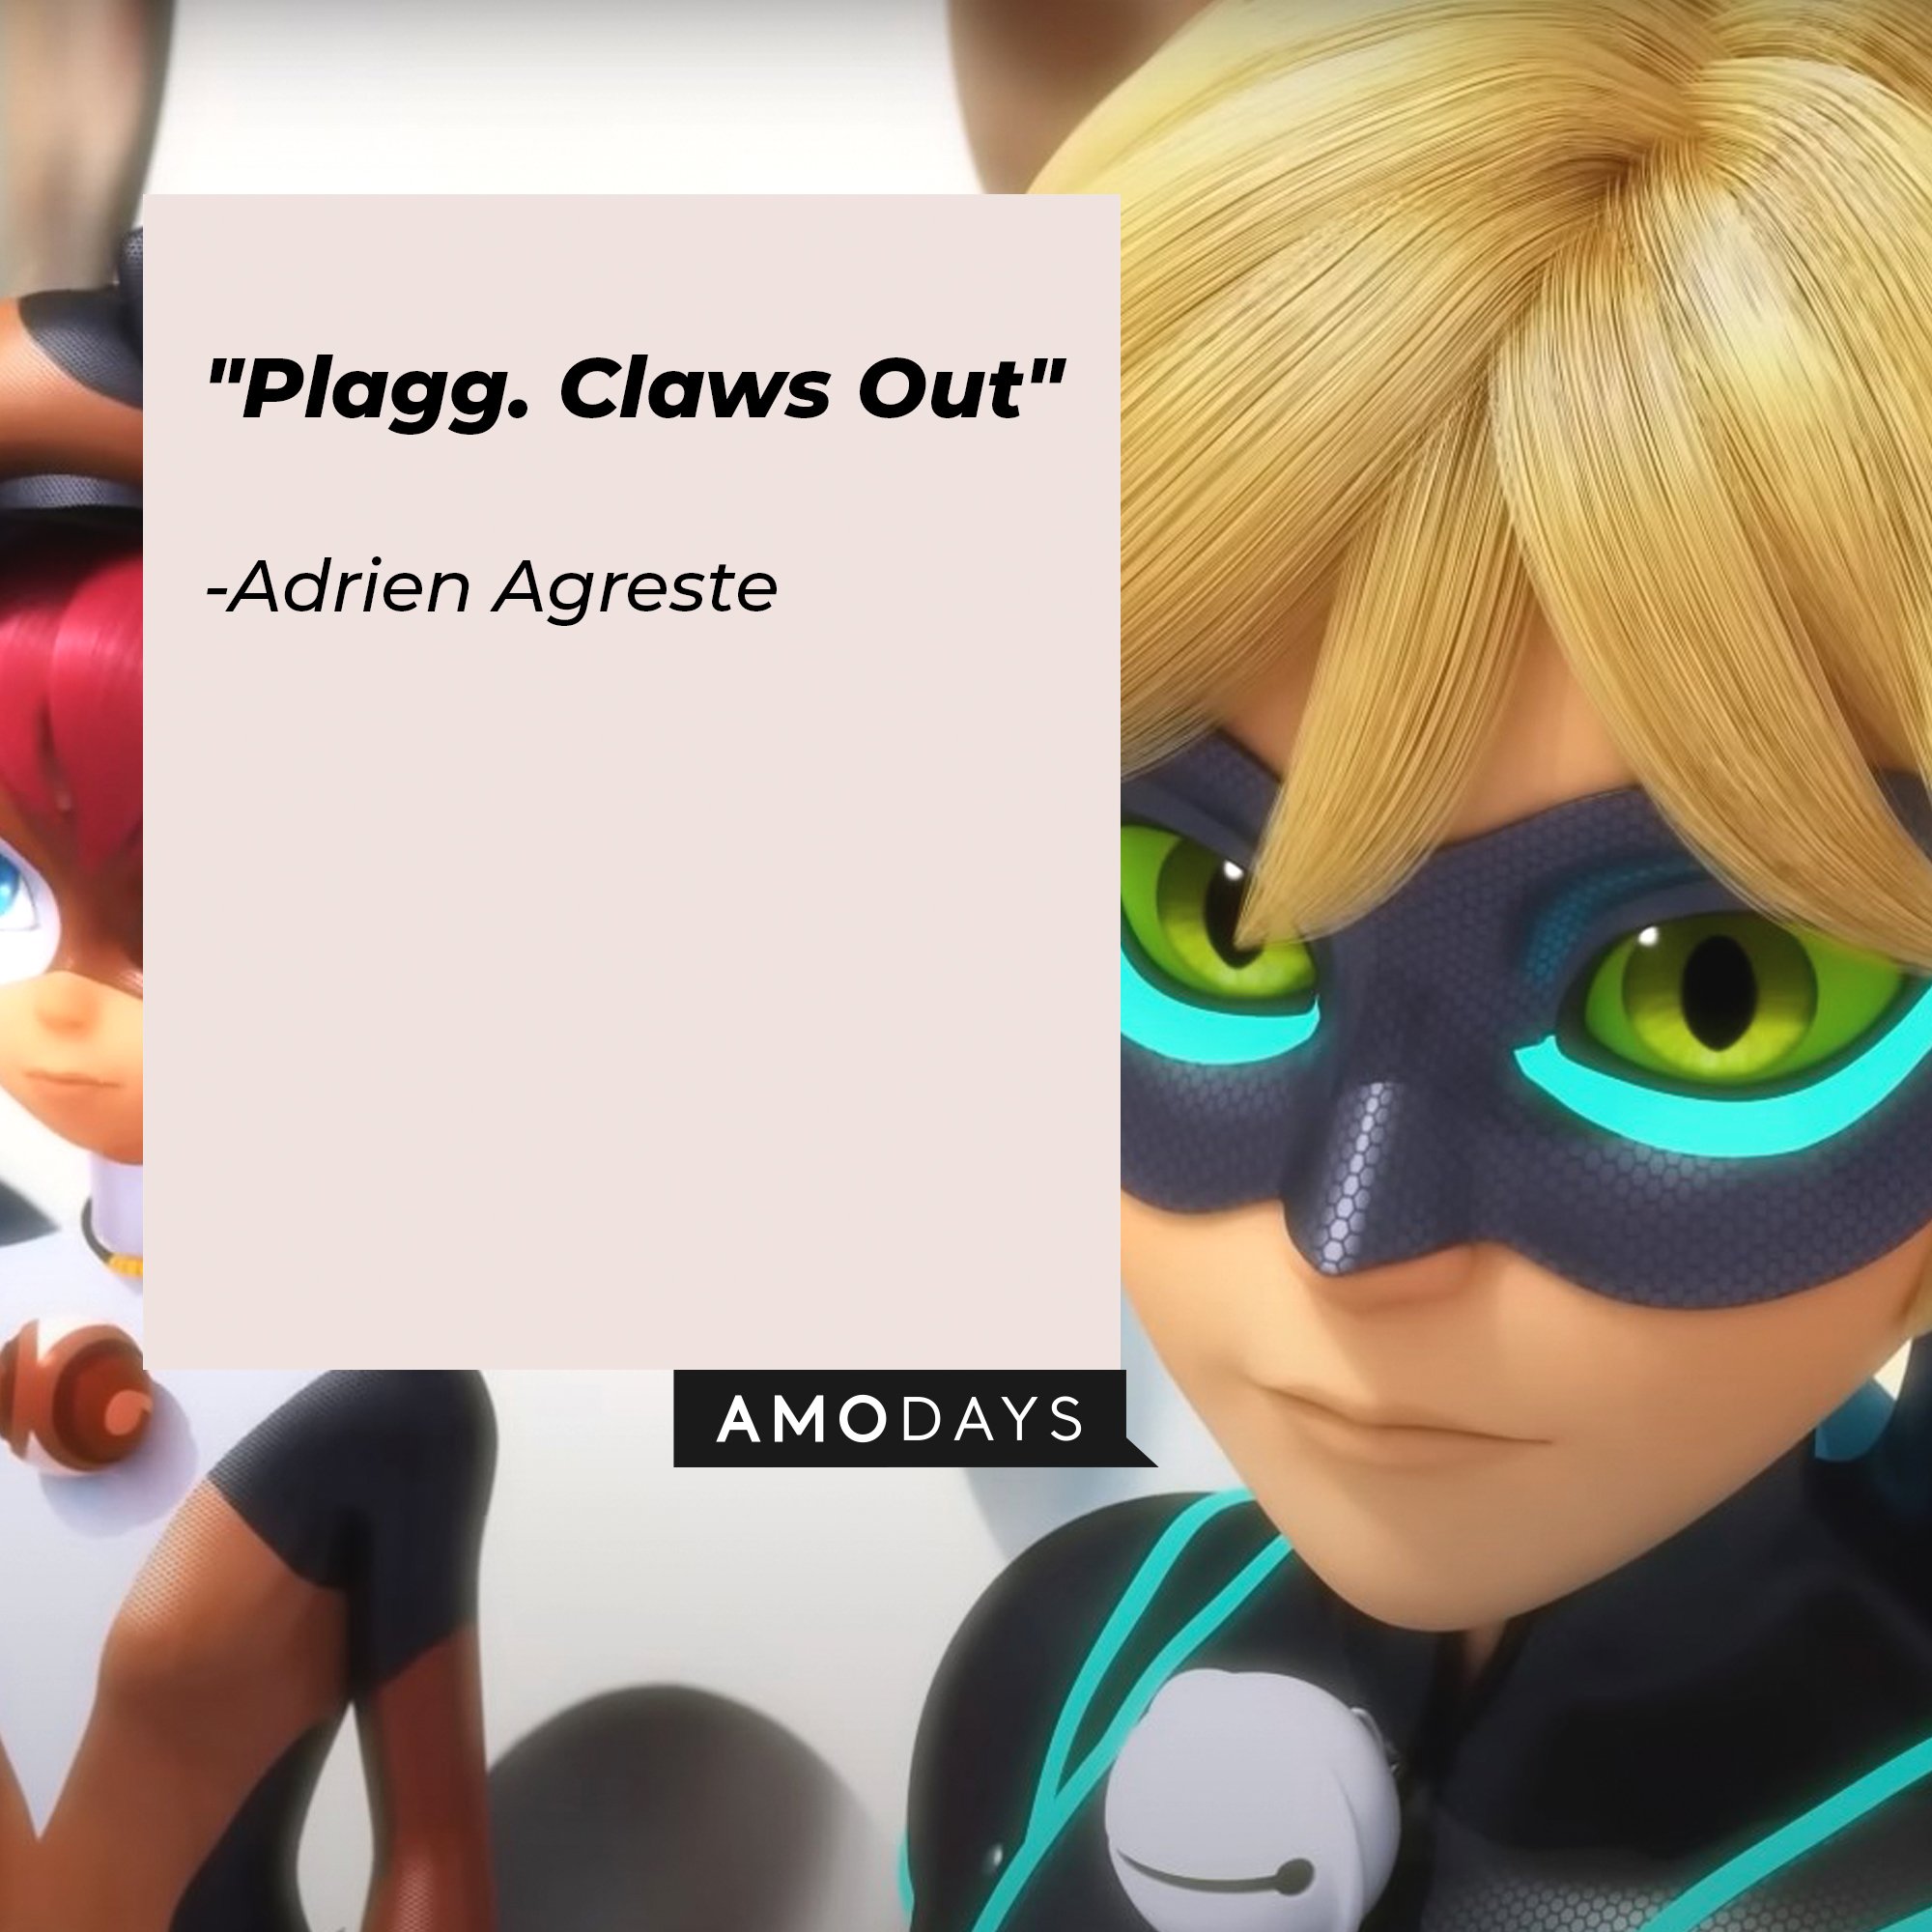 Adrien Agreste’s quote: "Plagg. Claws Out." | Image: AmoDays